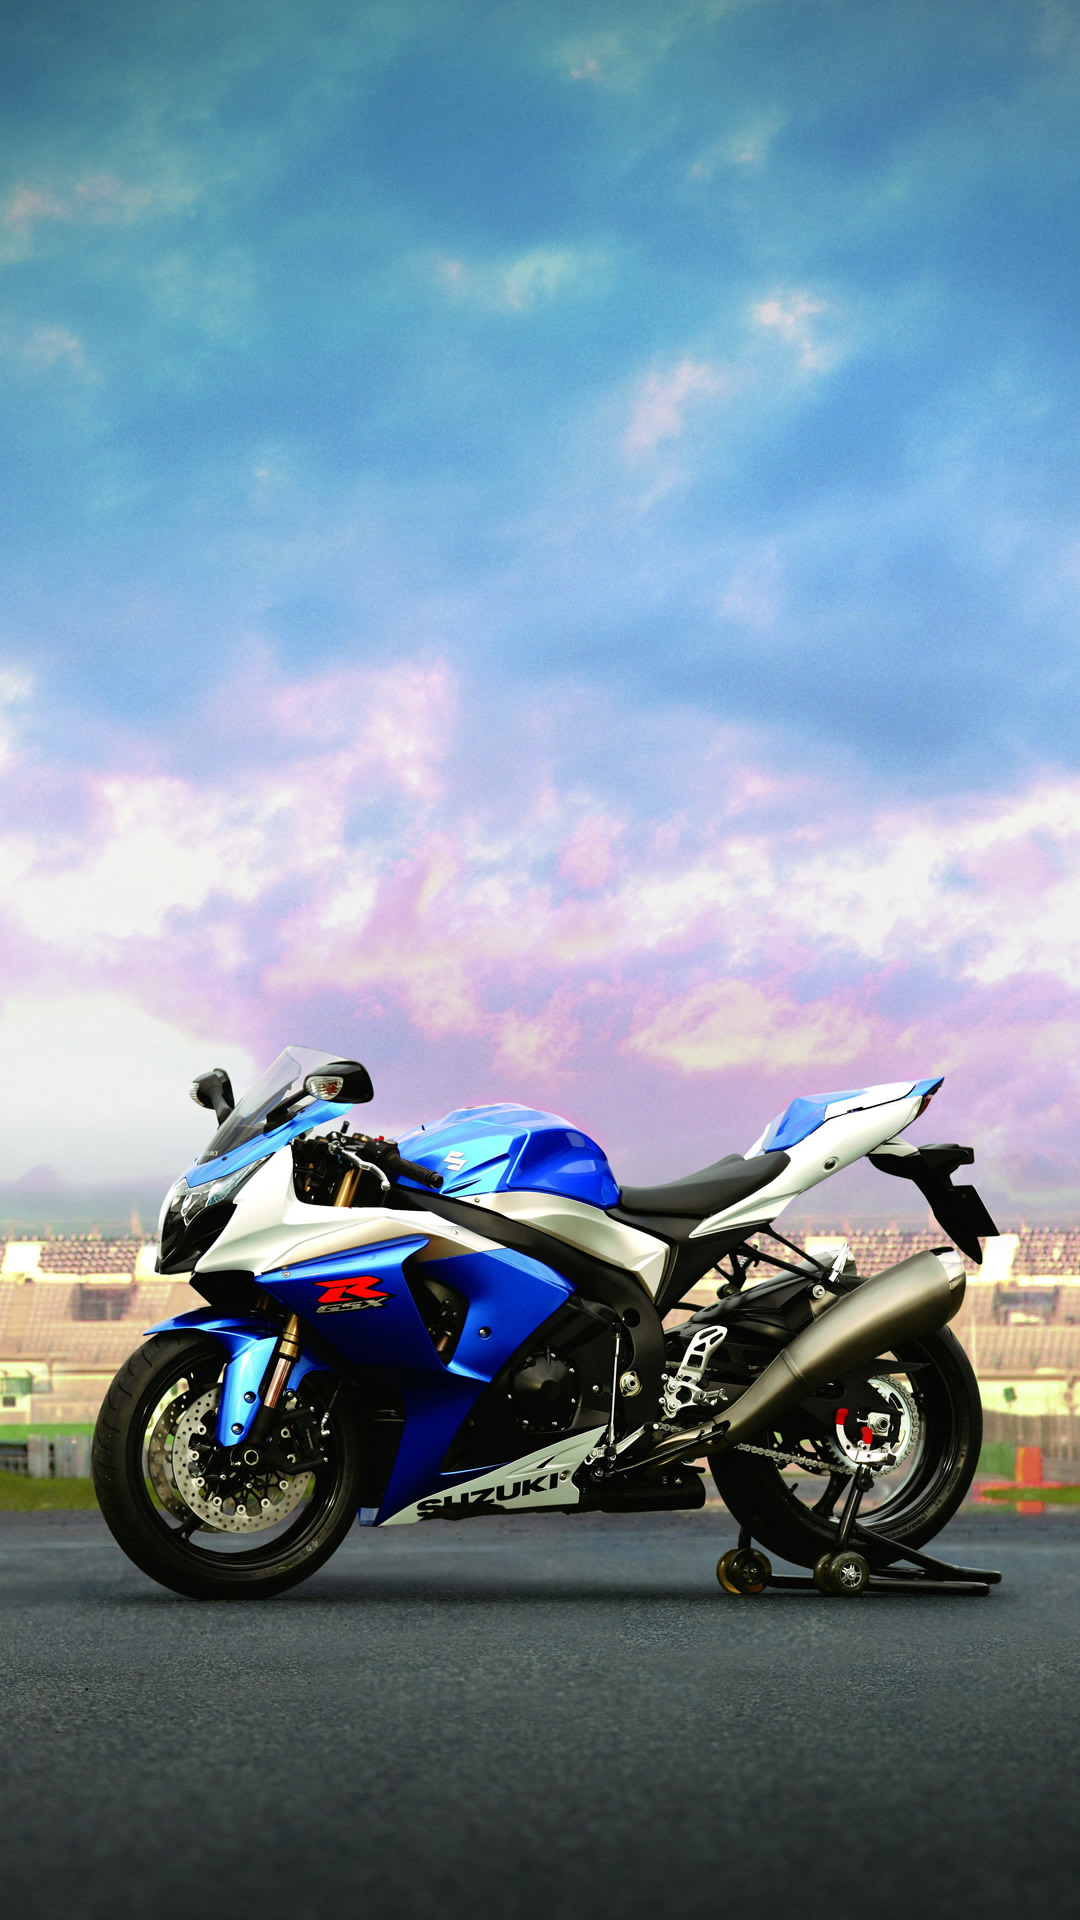 Suzuki GSX-R1000, 4K wallpapers free to download, High-quality images, 1080x1920 Full HD Phone